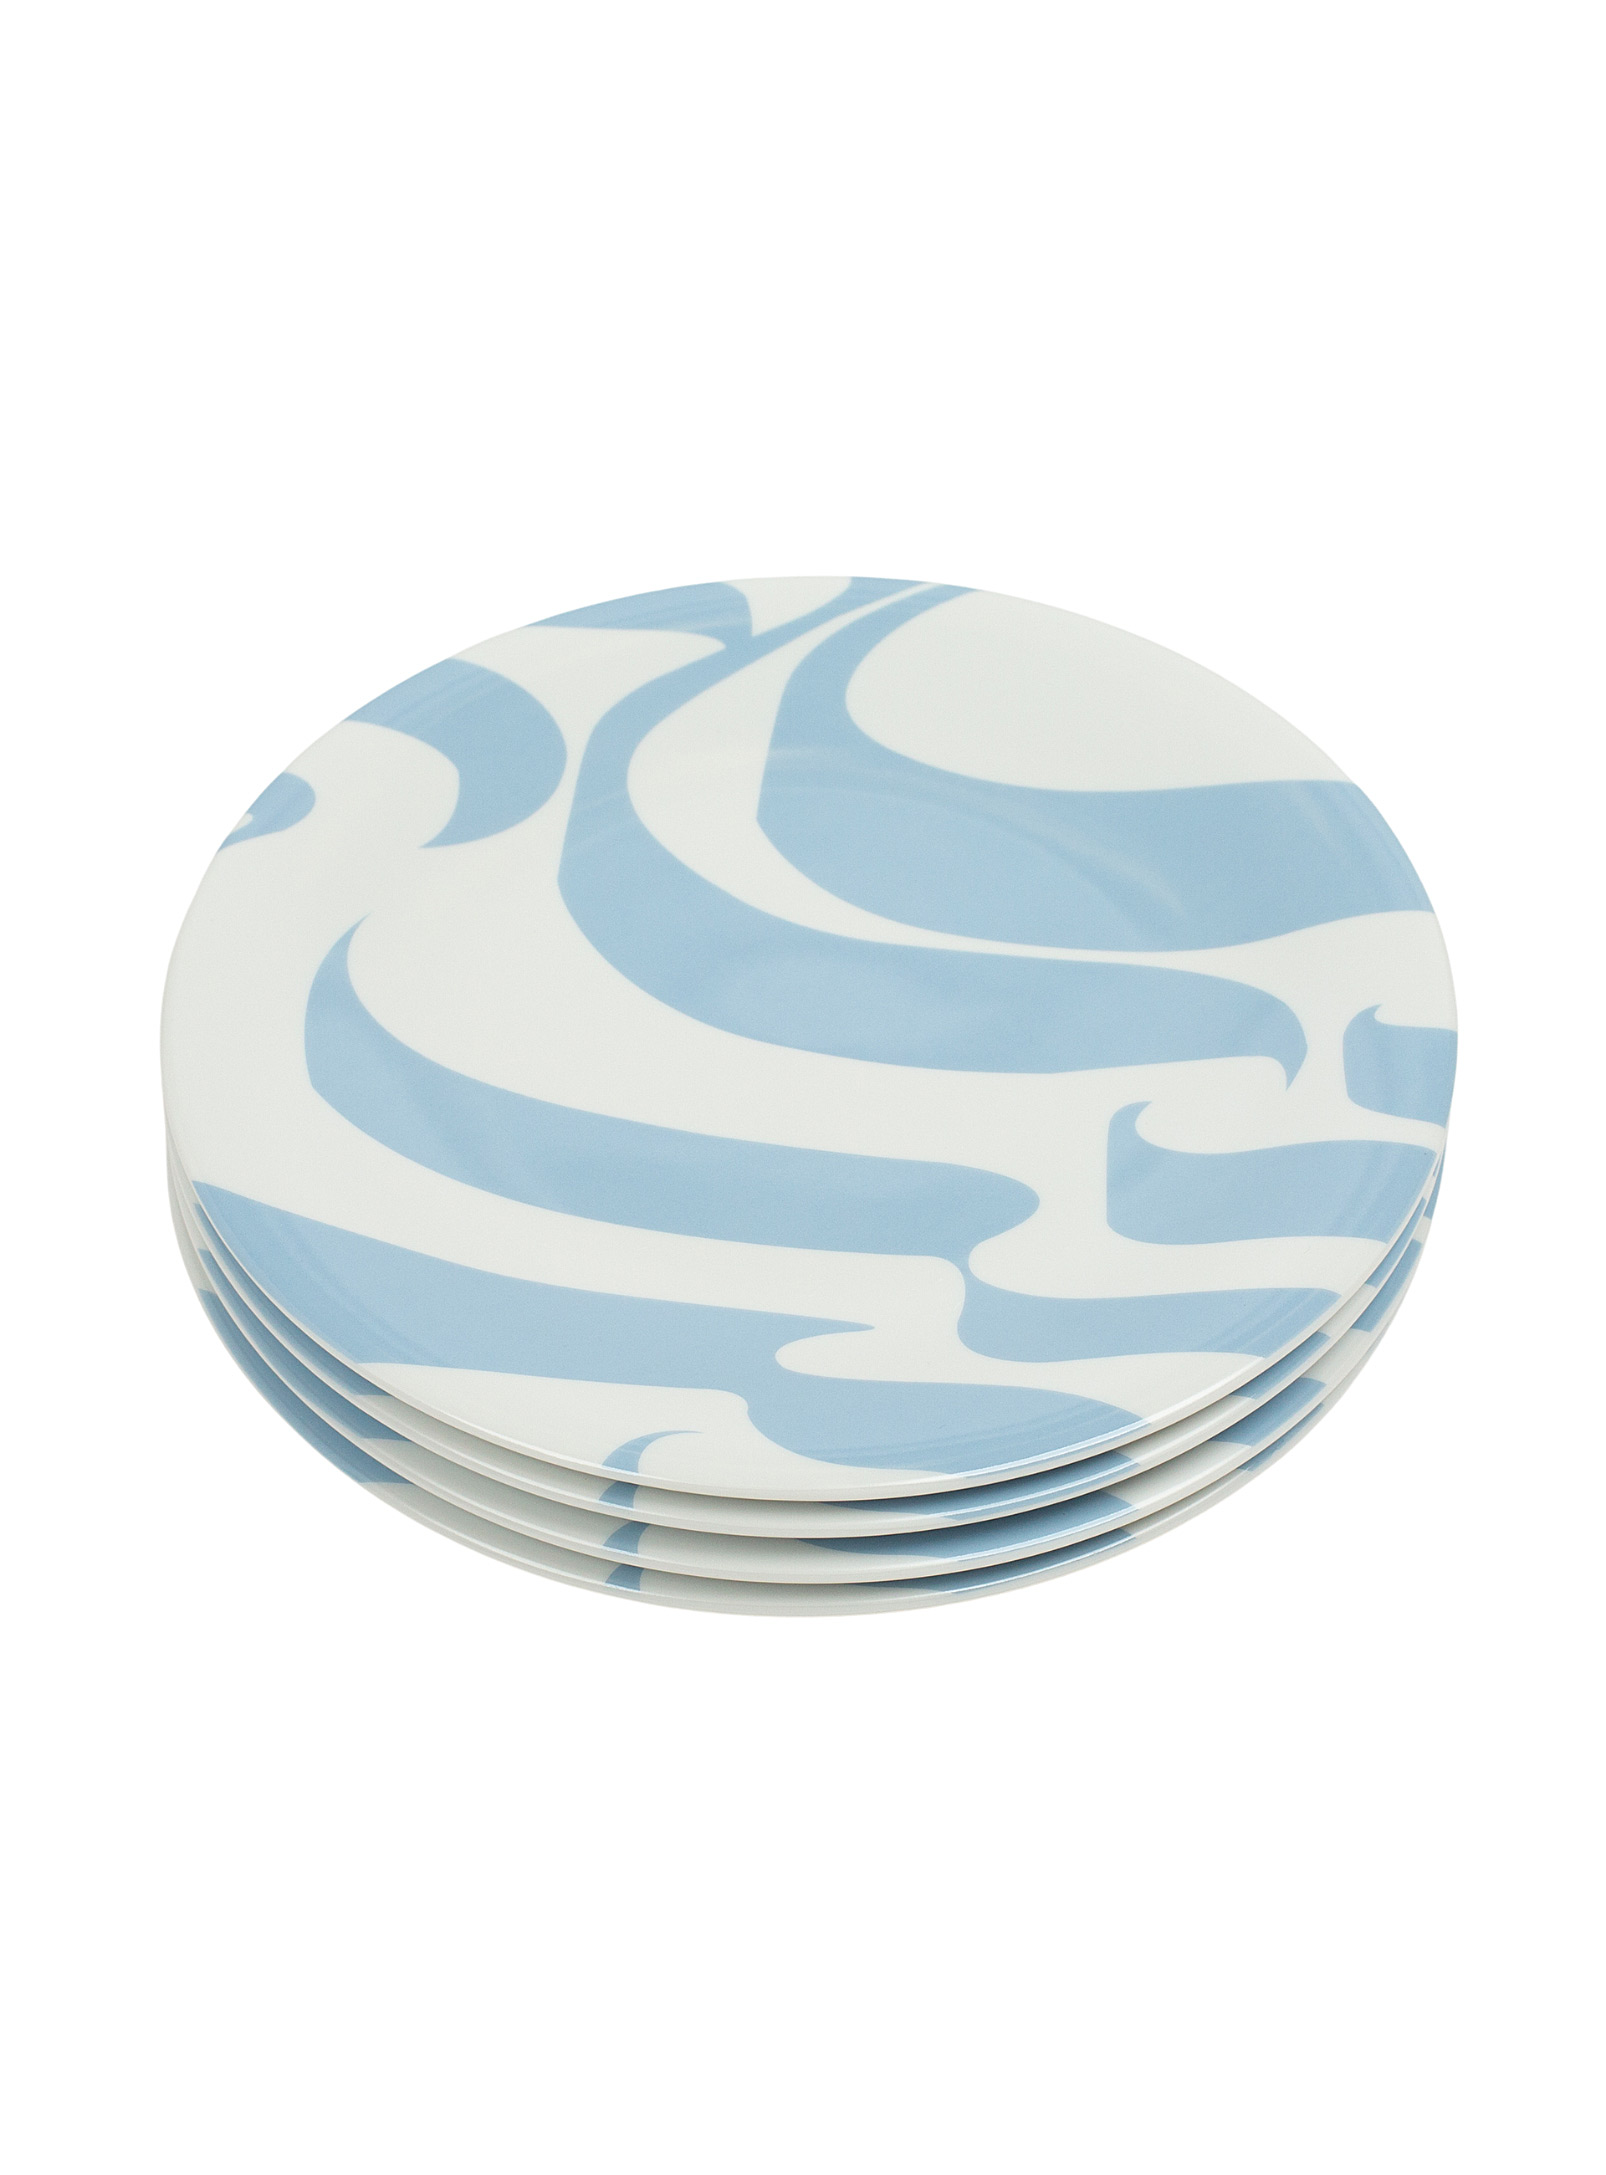 Misette Powdery Waves Salad Plates Set Of 4 In Baby Blue